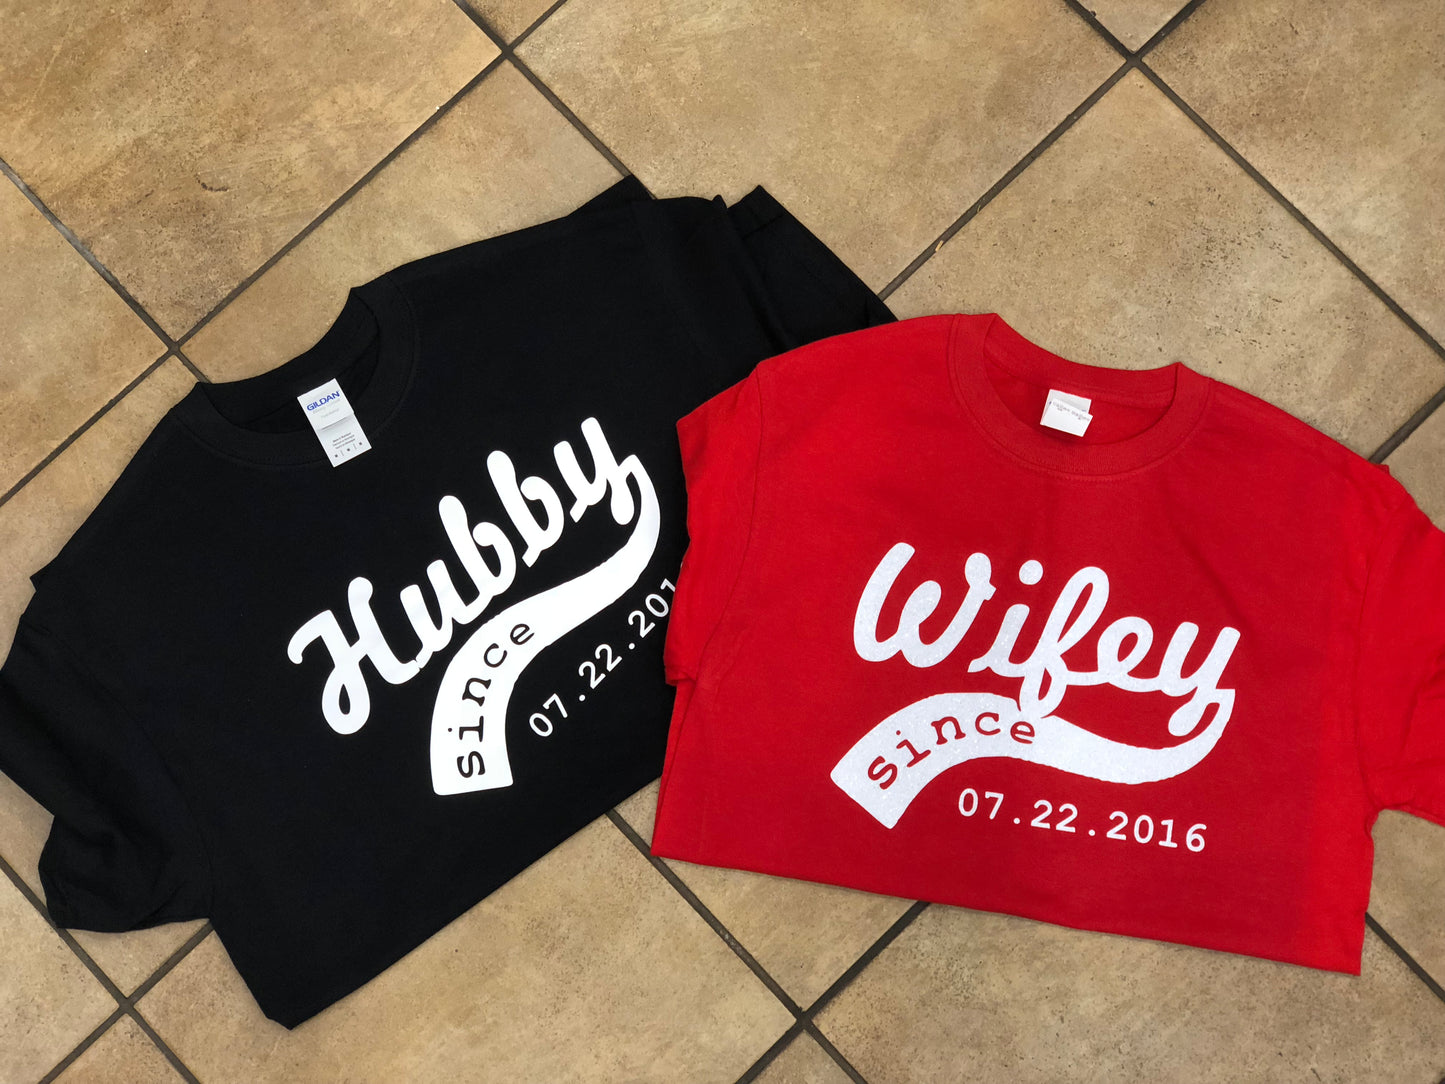 Hubby & Wifey Shirts - Southern Grace Creations